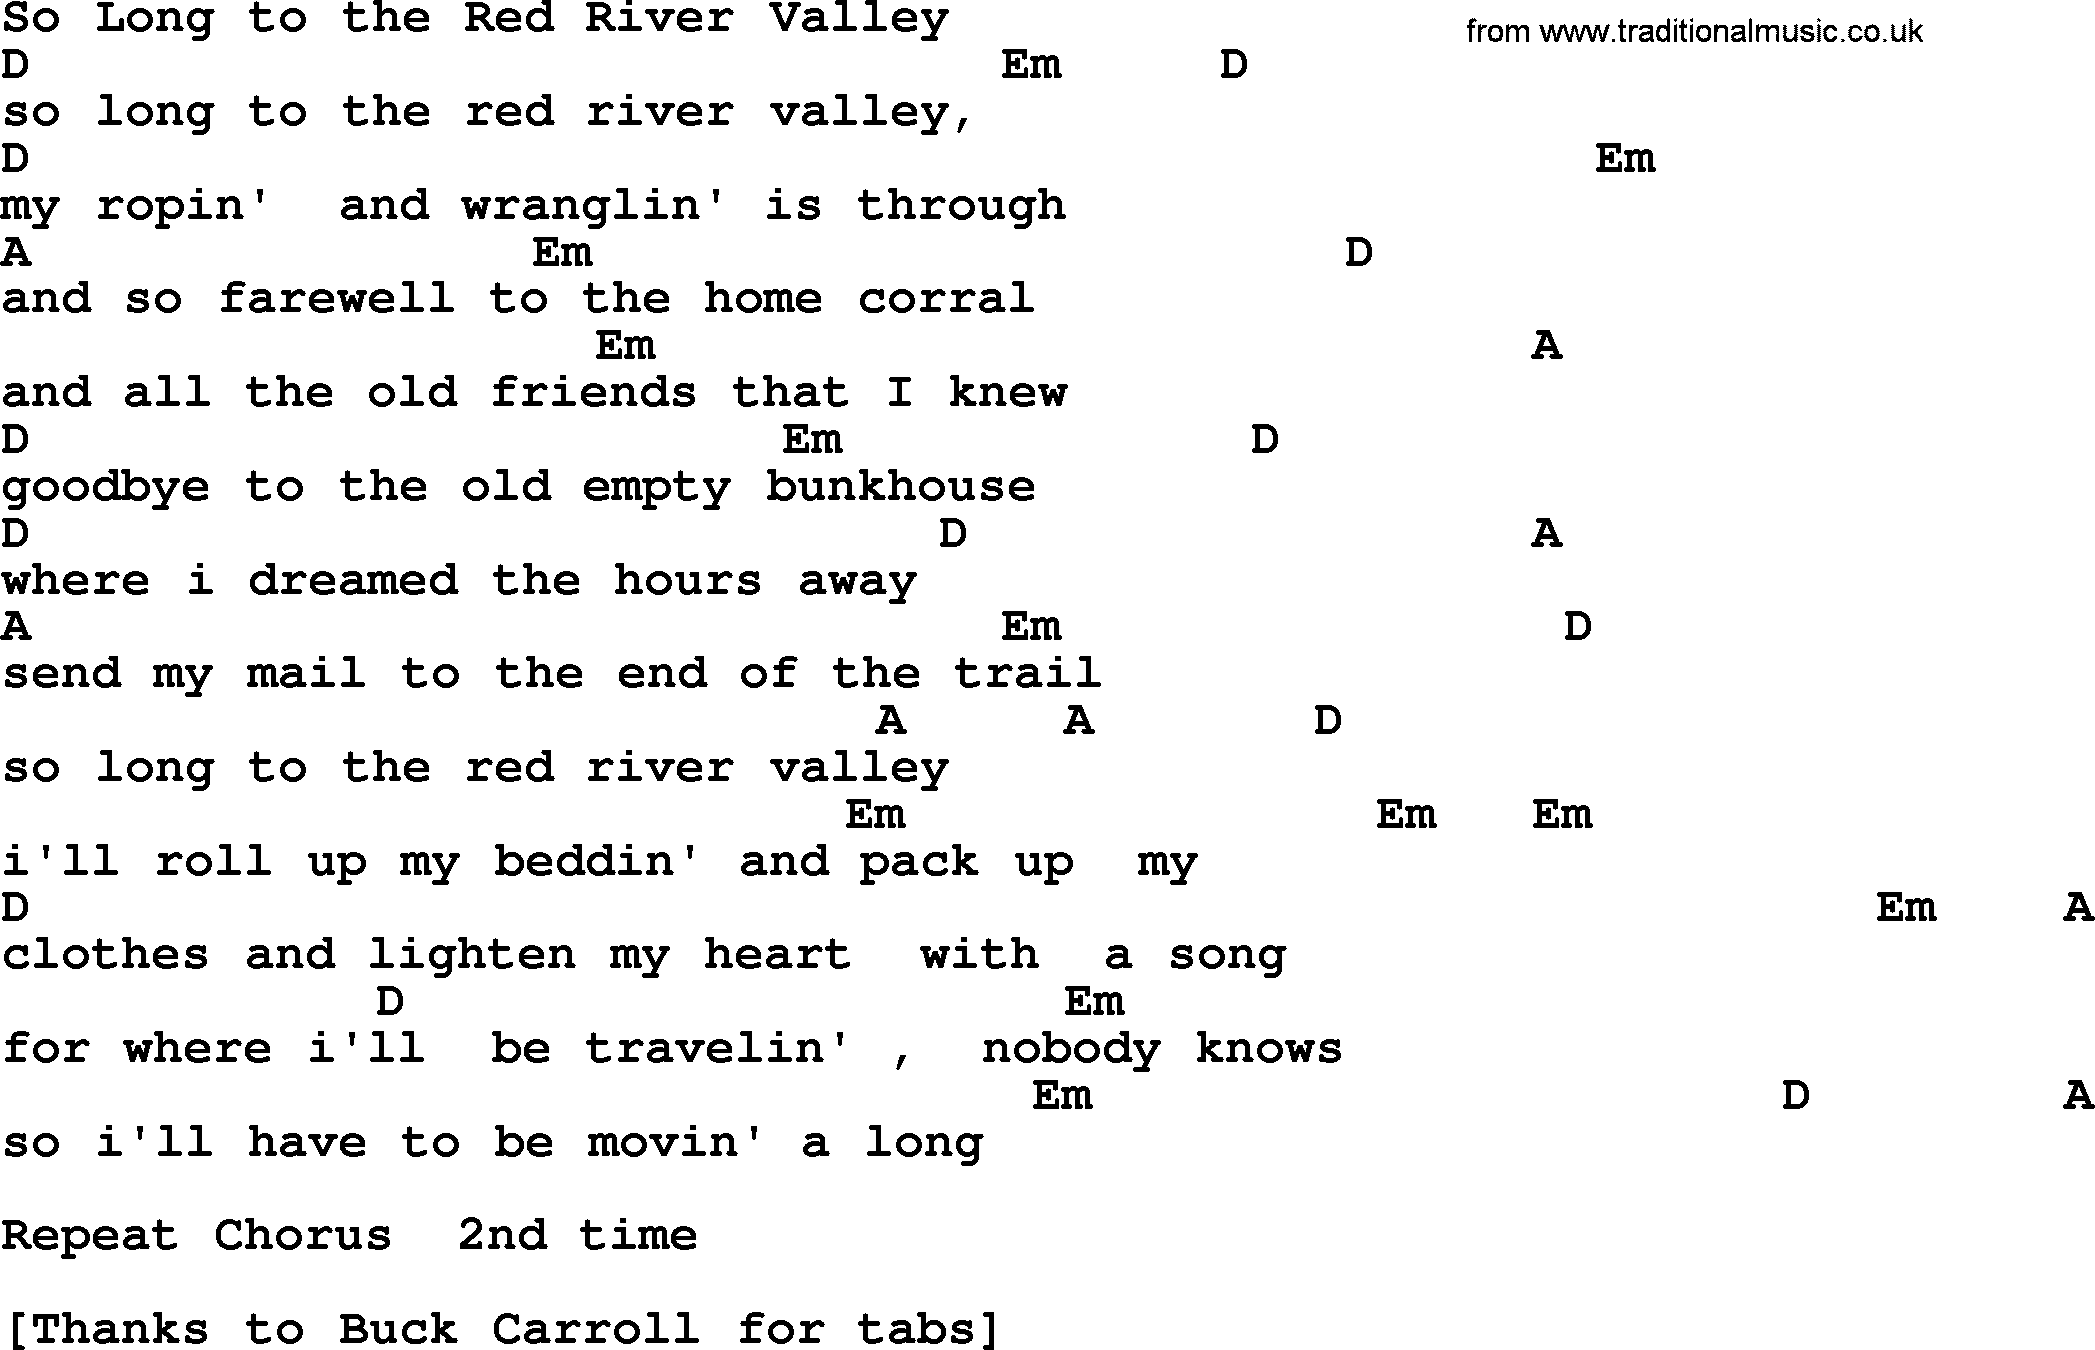 Bluegrass song: So Long To The Red River Valley, lyrics and chords